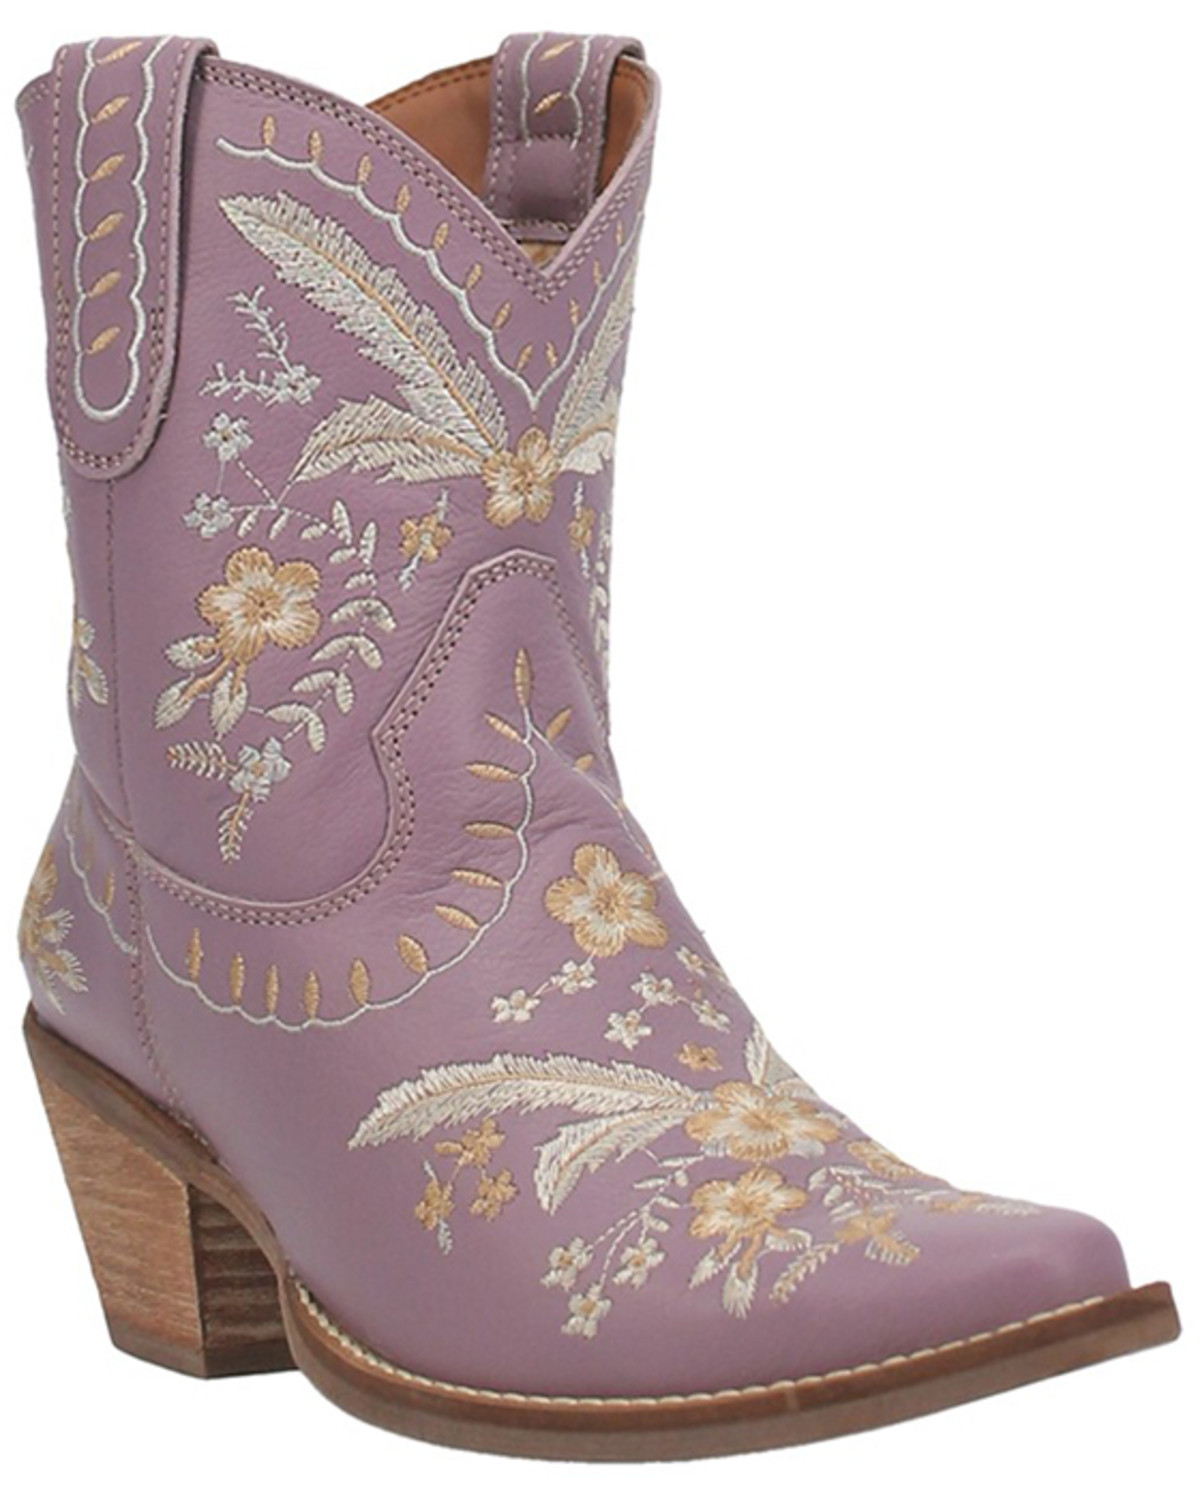 Women's Western Cowboy Boots Purple Real Leather Embroidered Snip Toe 